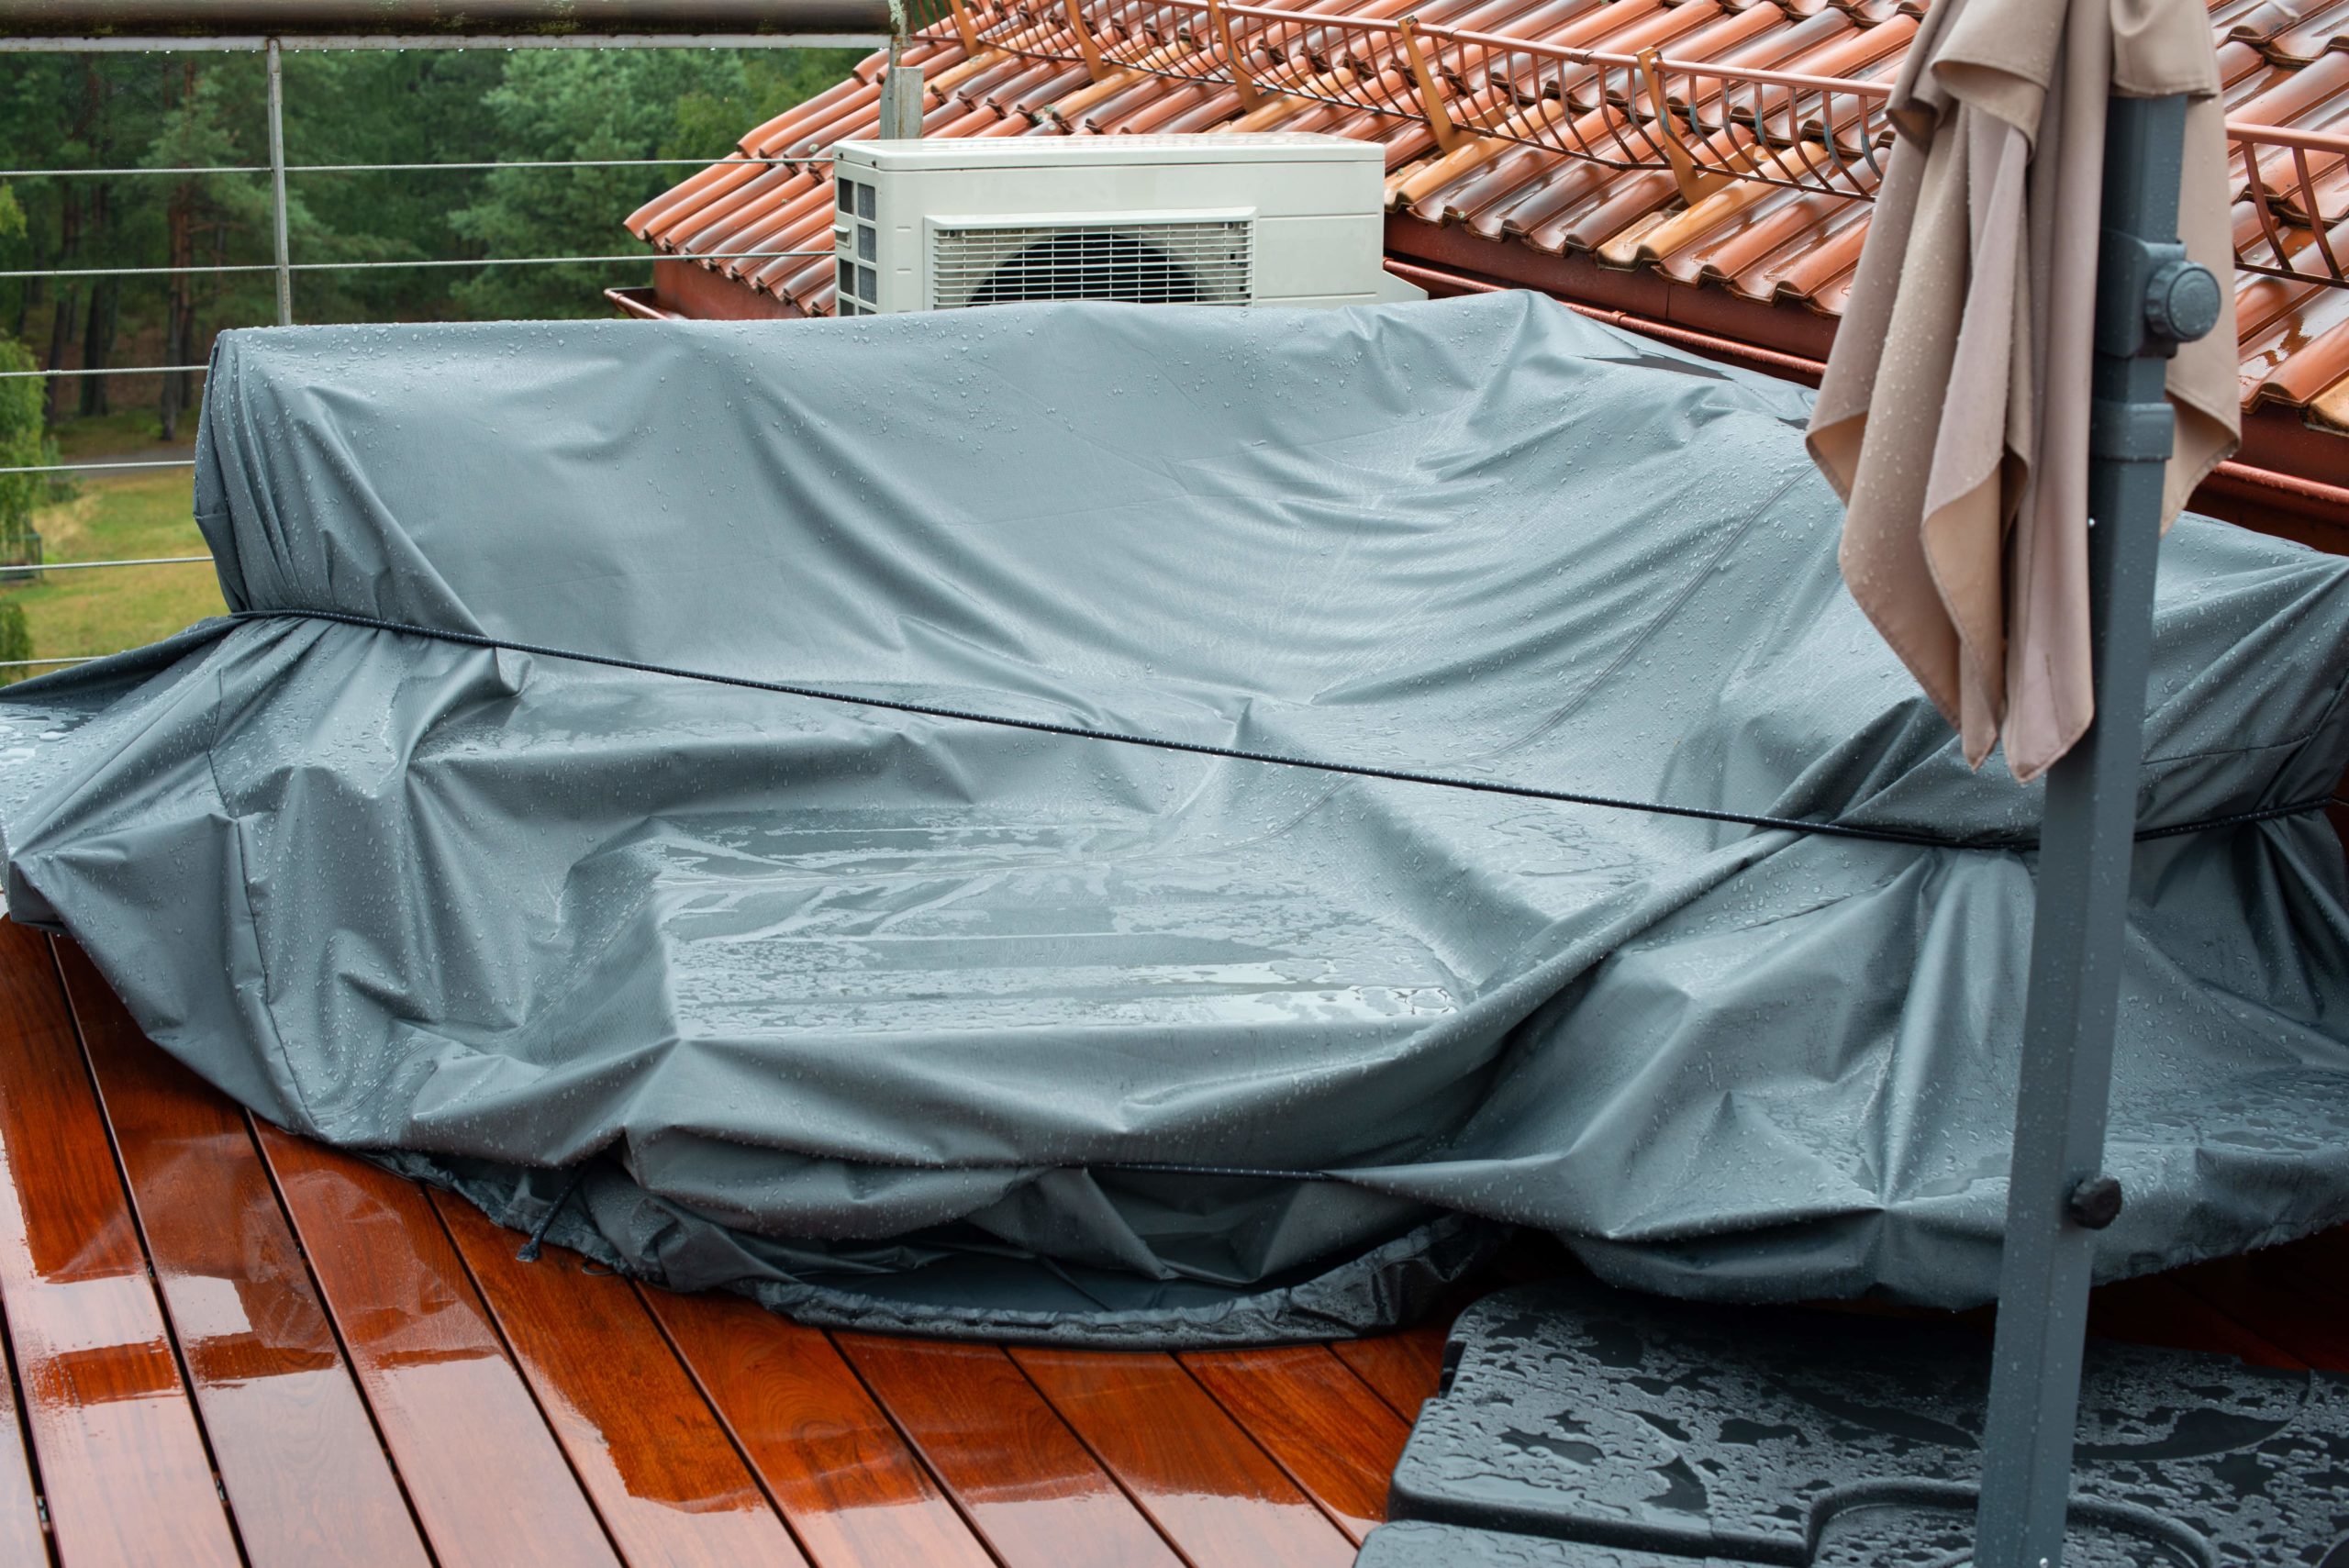 Patio furniture covered with waterproof tarp.